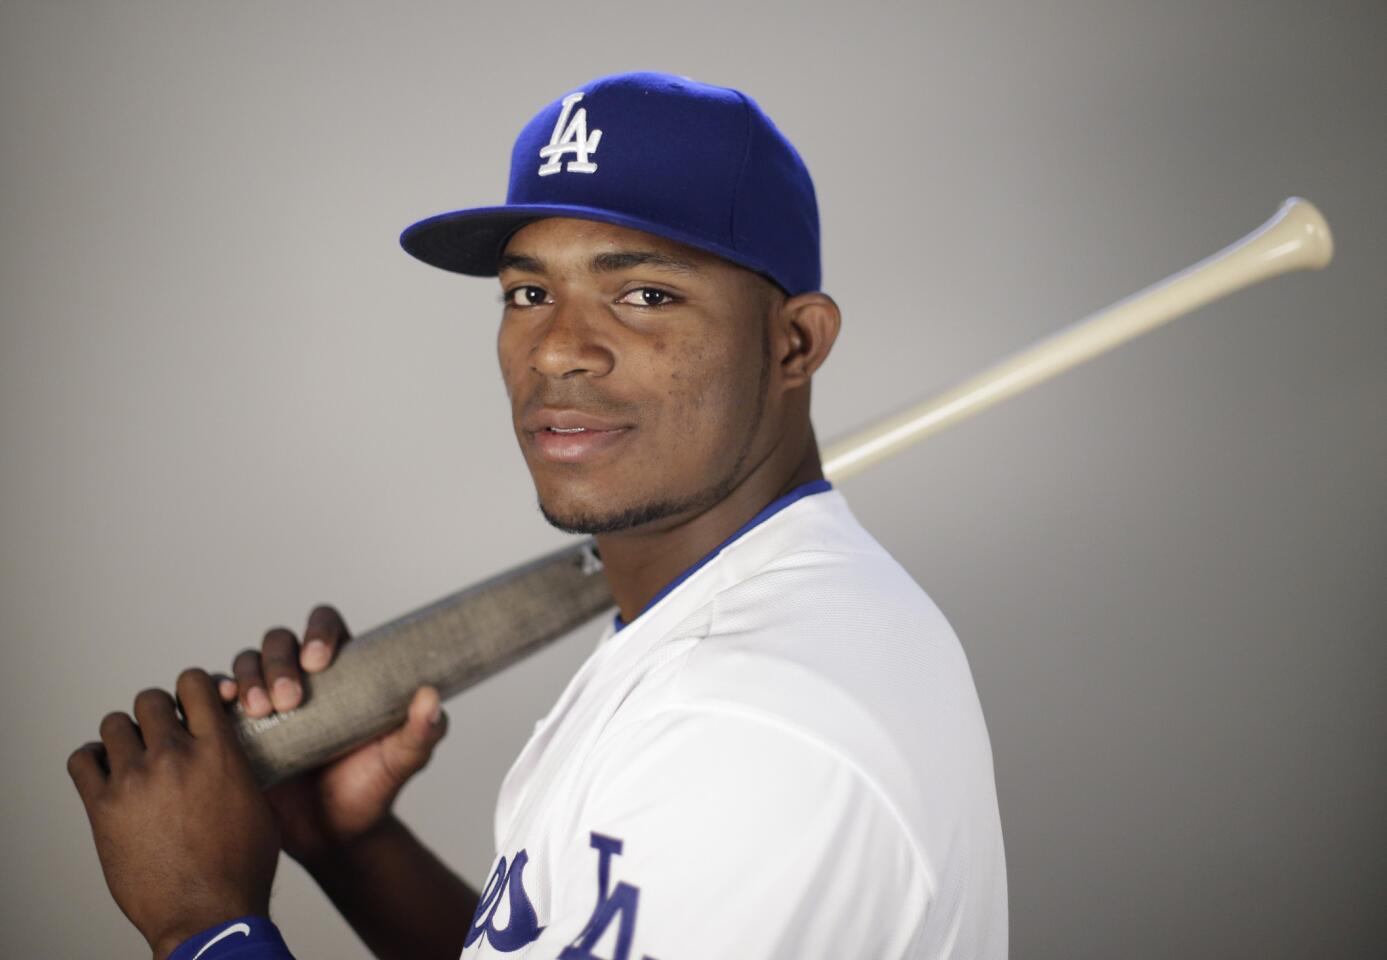 This is a 2016 photo of Yasiel Puig of the Los Angeles Dodgers baseball team. This image reflects the Los Angeles Dodgers active roster as of Saturday, Feb. 27, 2016, when this image was taken. (AP Photo/Chris Carlson)